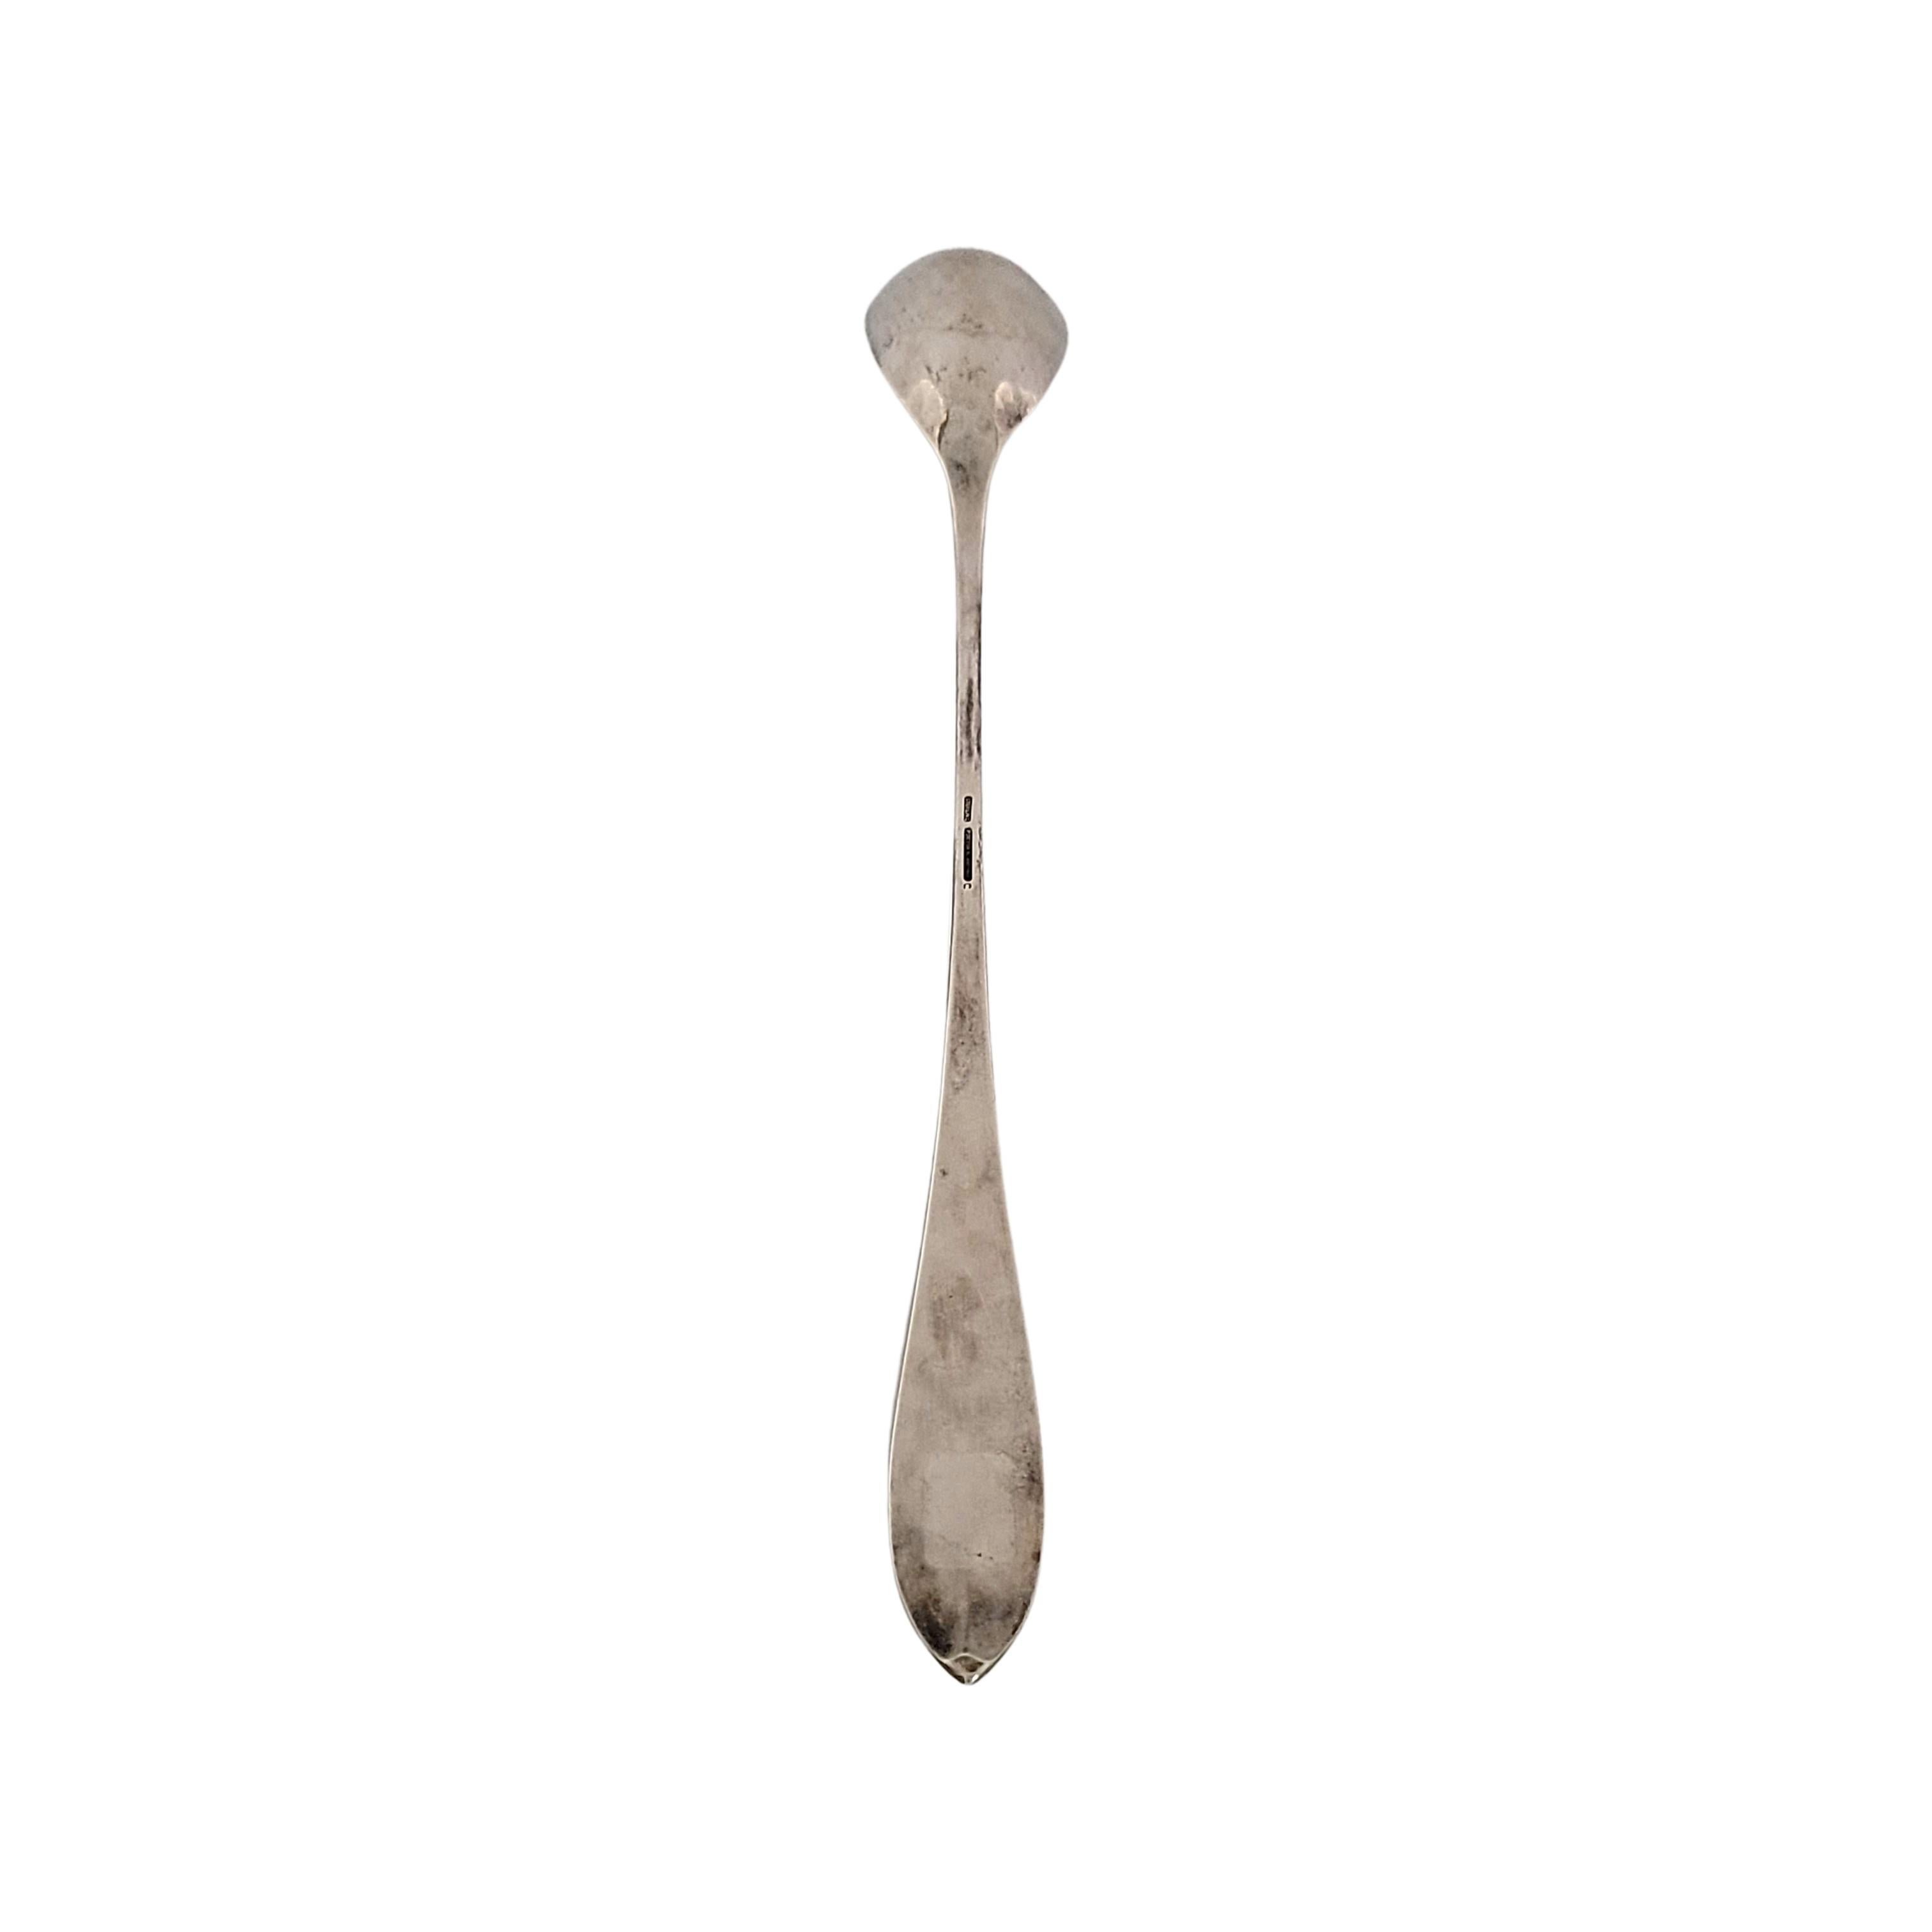 Sterling silver sauce or lemonade spoon by Porter Blanchard in the Pointed pattern of 1800.

No monogram

Designed by Porter Blanchard, this beautiful, long spoon features a simple design with a classic, timeless appeal.

Measures approx 12 1/4